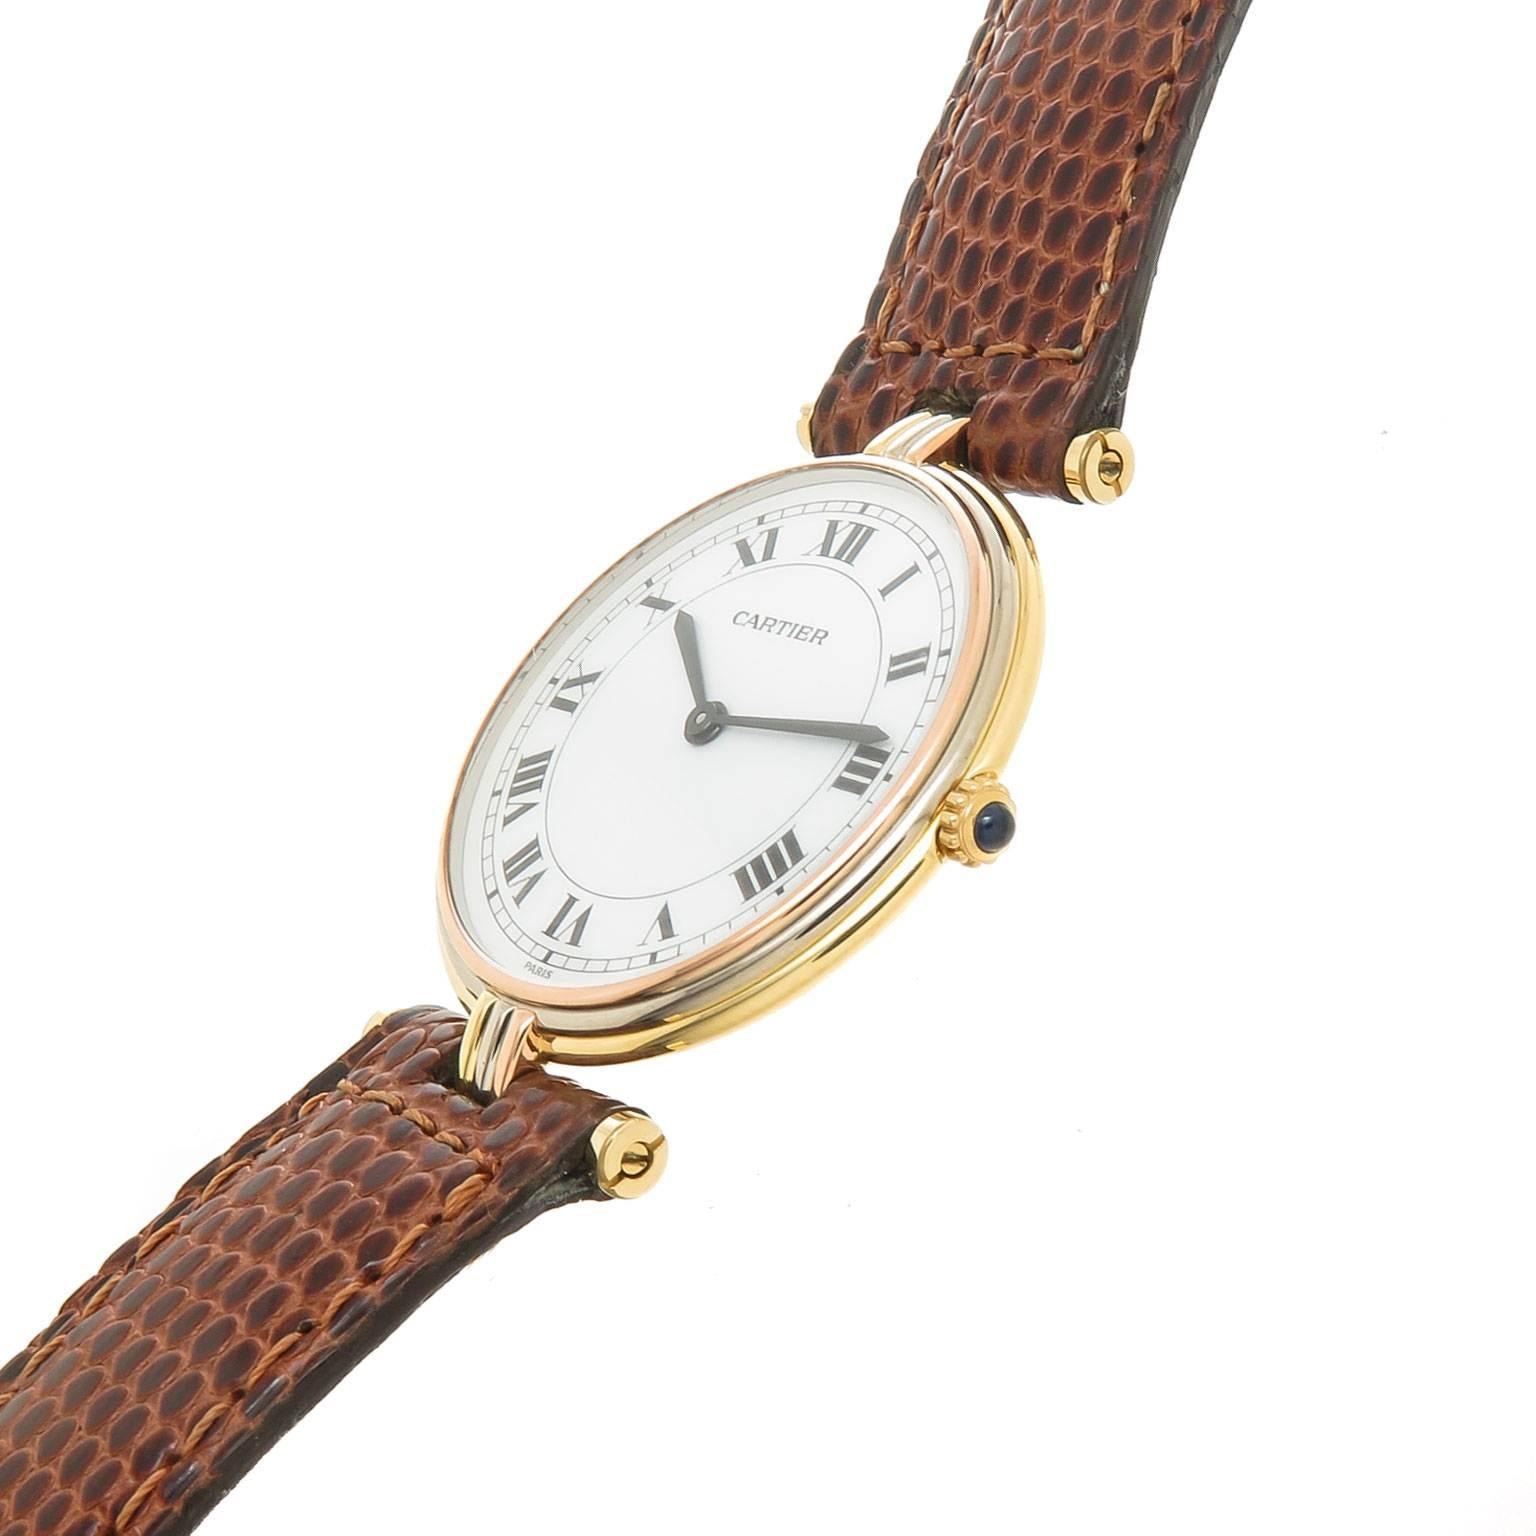 Circa 1990s Cartier 18K Yellow, White and Rose Gold Vendome, Trinity Watch. 2 piece 30 MM water resistant case, Quartz Movement, White Dial with Black Roman Numerals and a Sapphire set crown. Original Brown Lizard strap with a Gold Plate Cartier